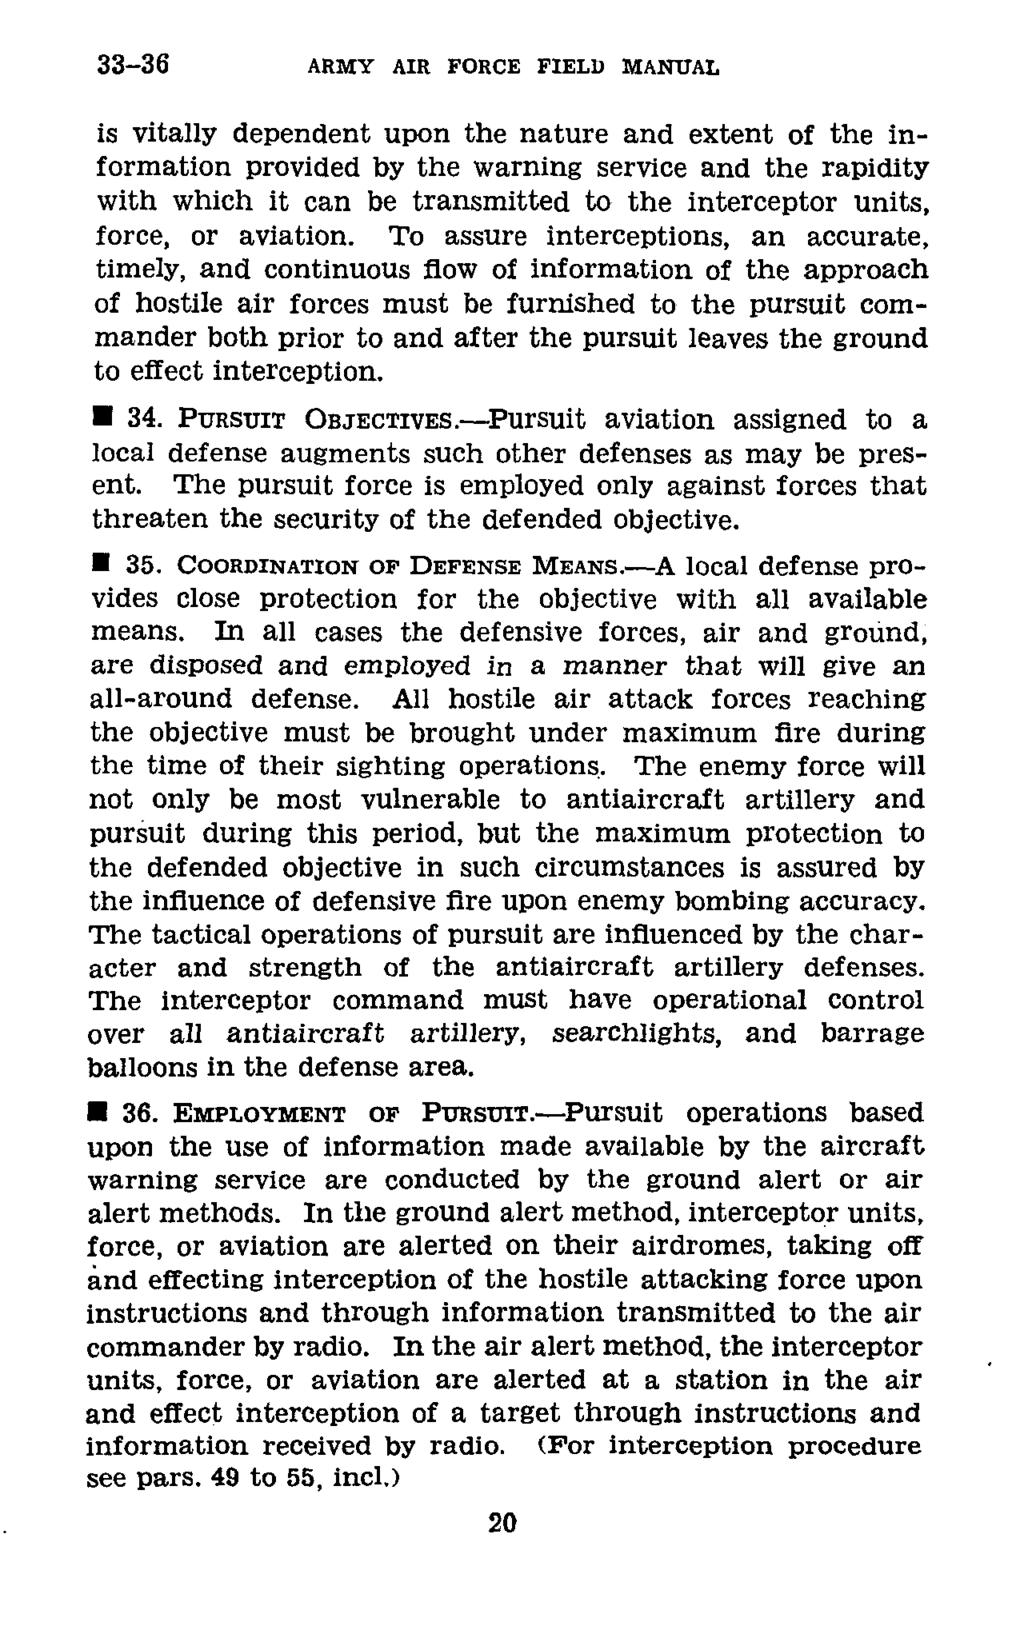 33-36 ARMY AIR FORCE FIELD MANUAL is vitally dependent upon the nature and extent of the information provided by the warning service and the rapidity with which it can be transmitted to the